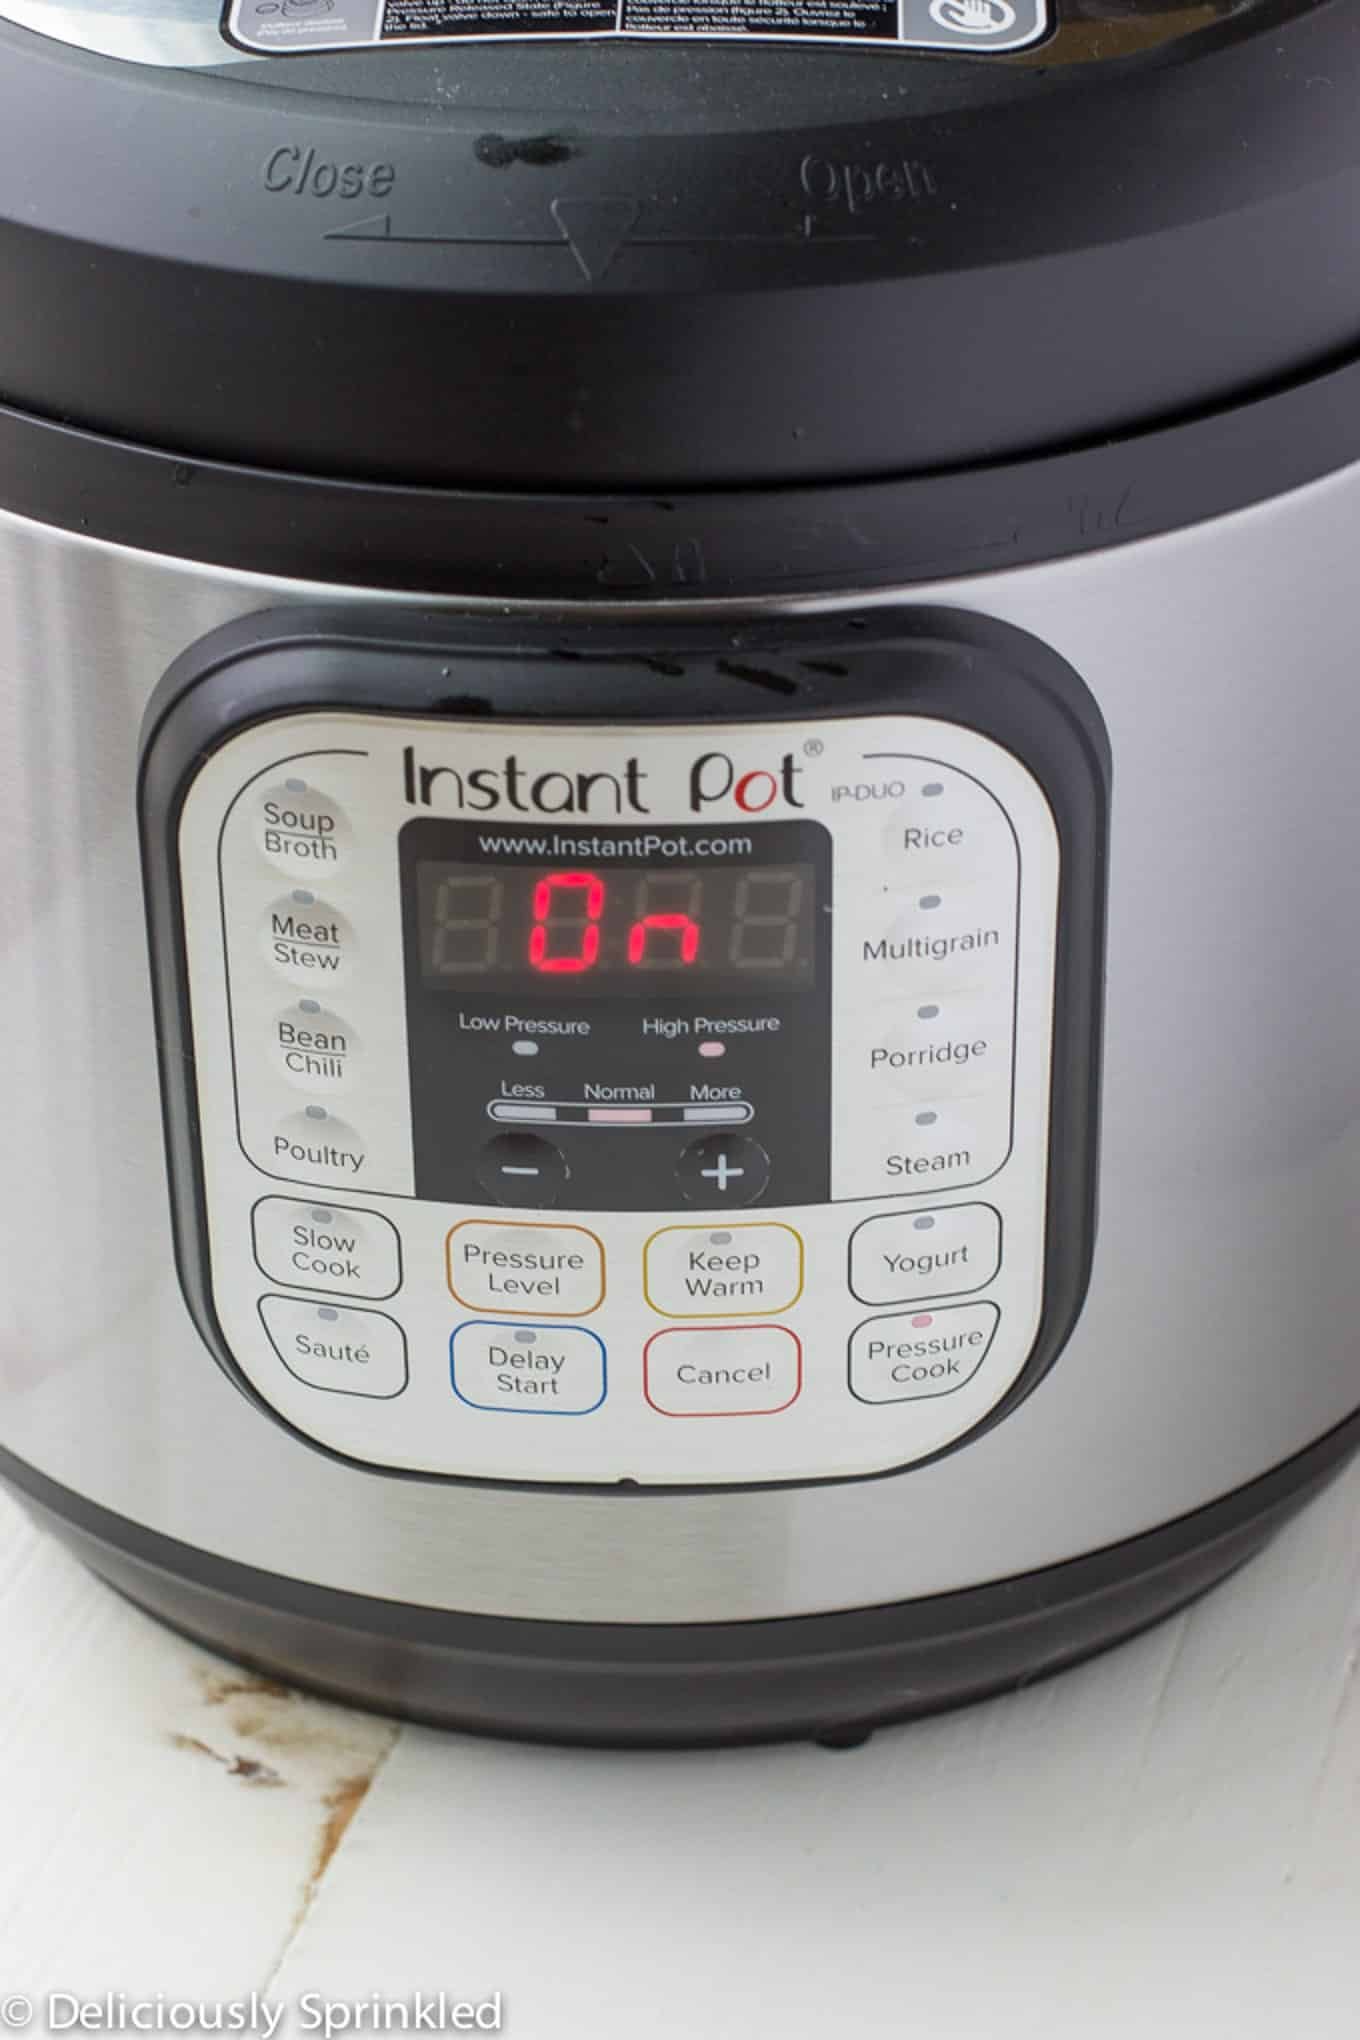 The instant pot with the time set and On.